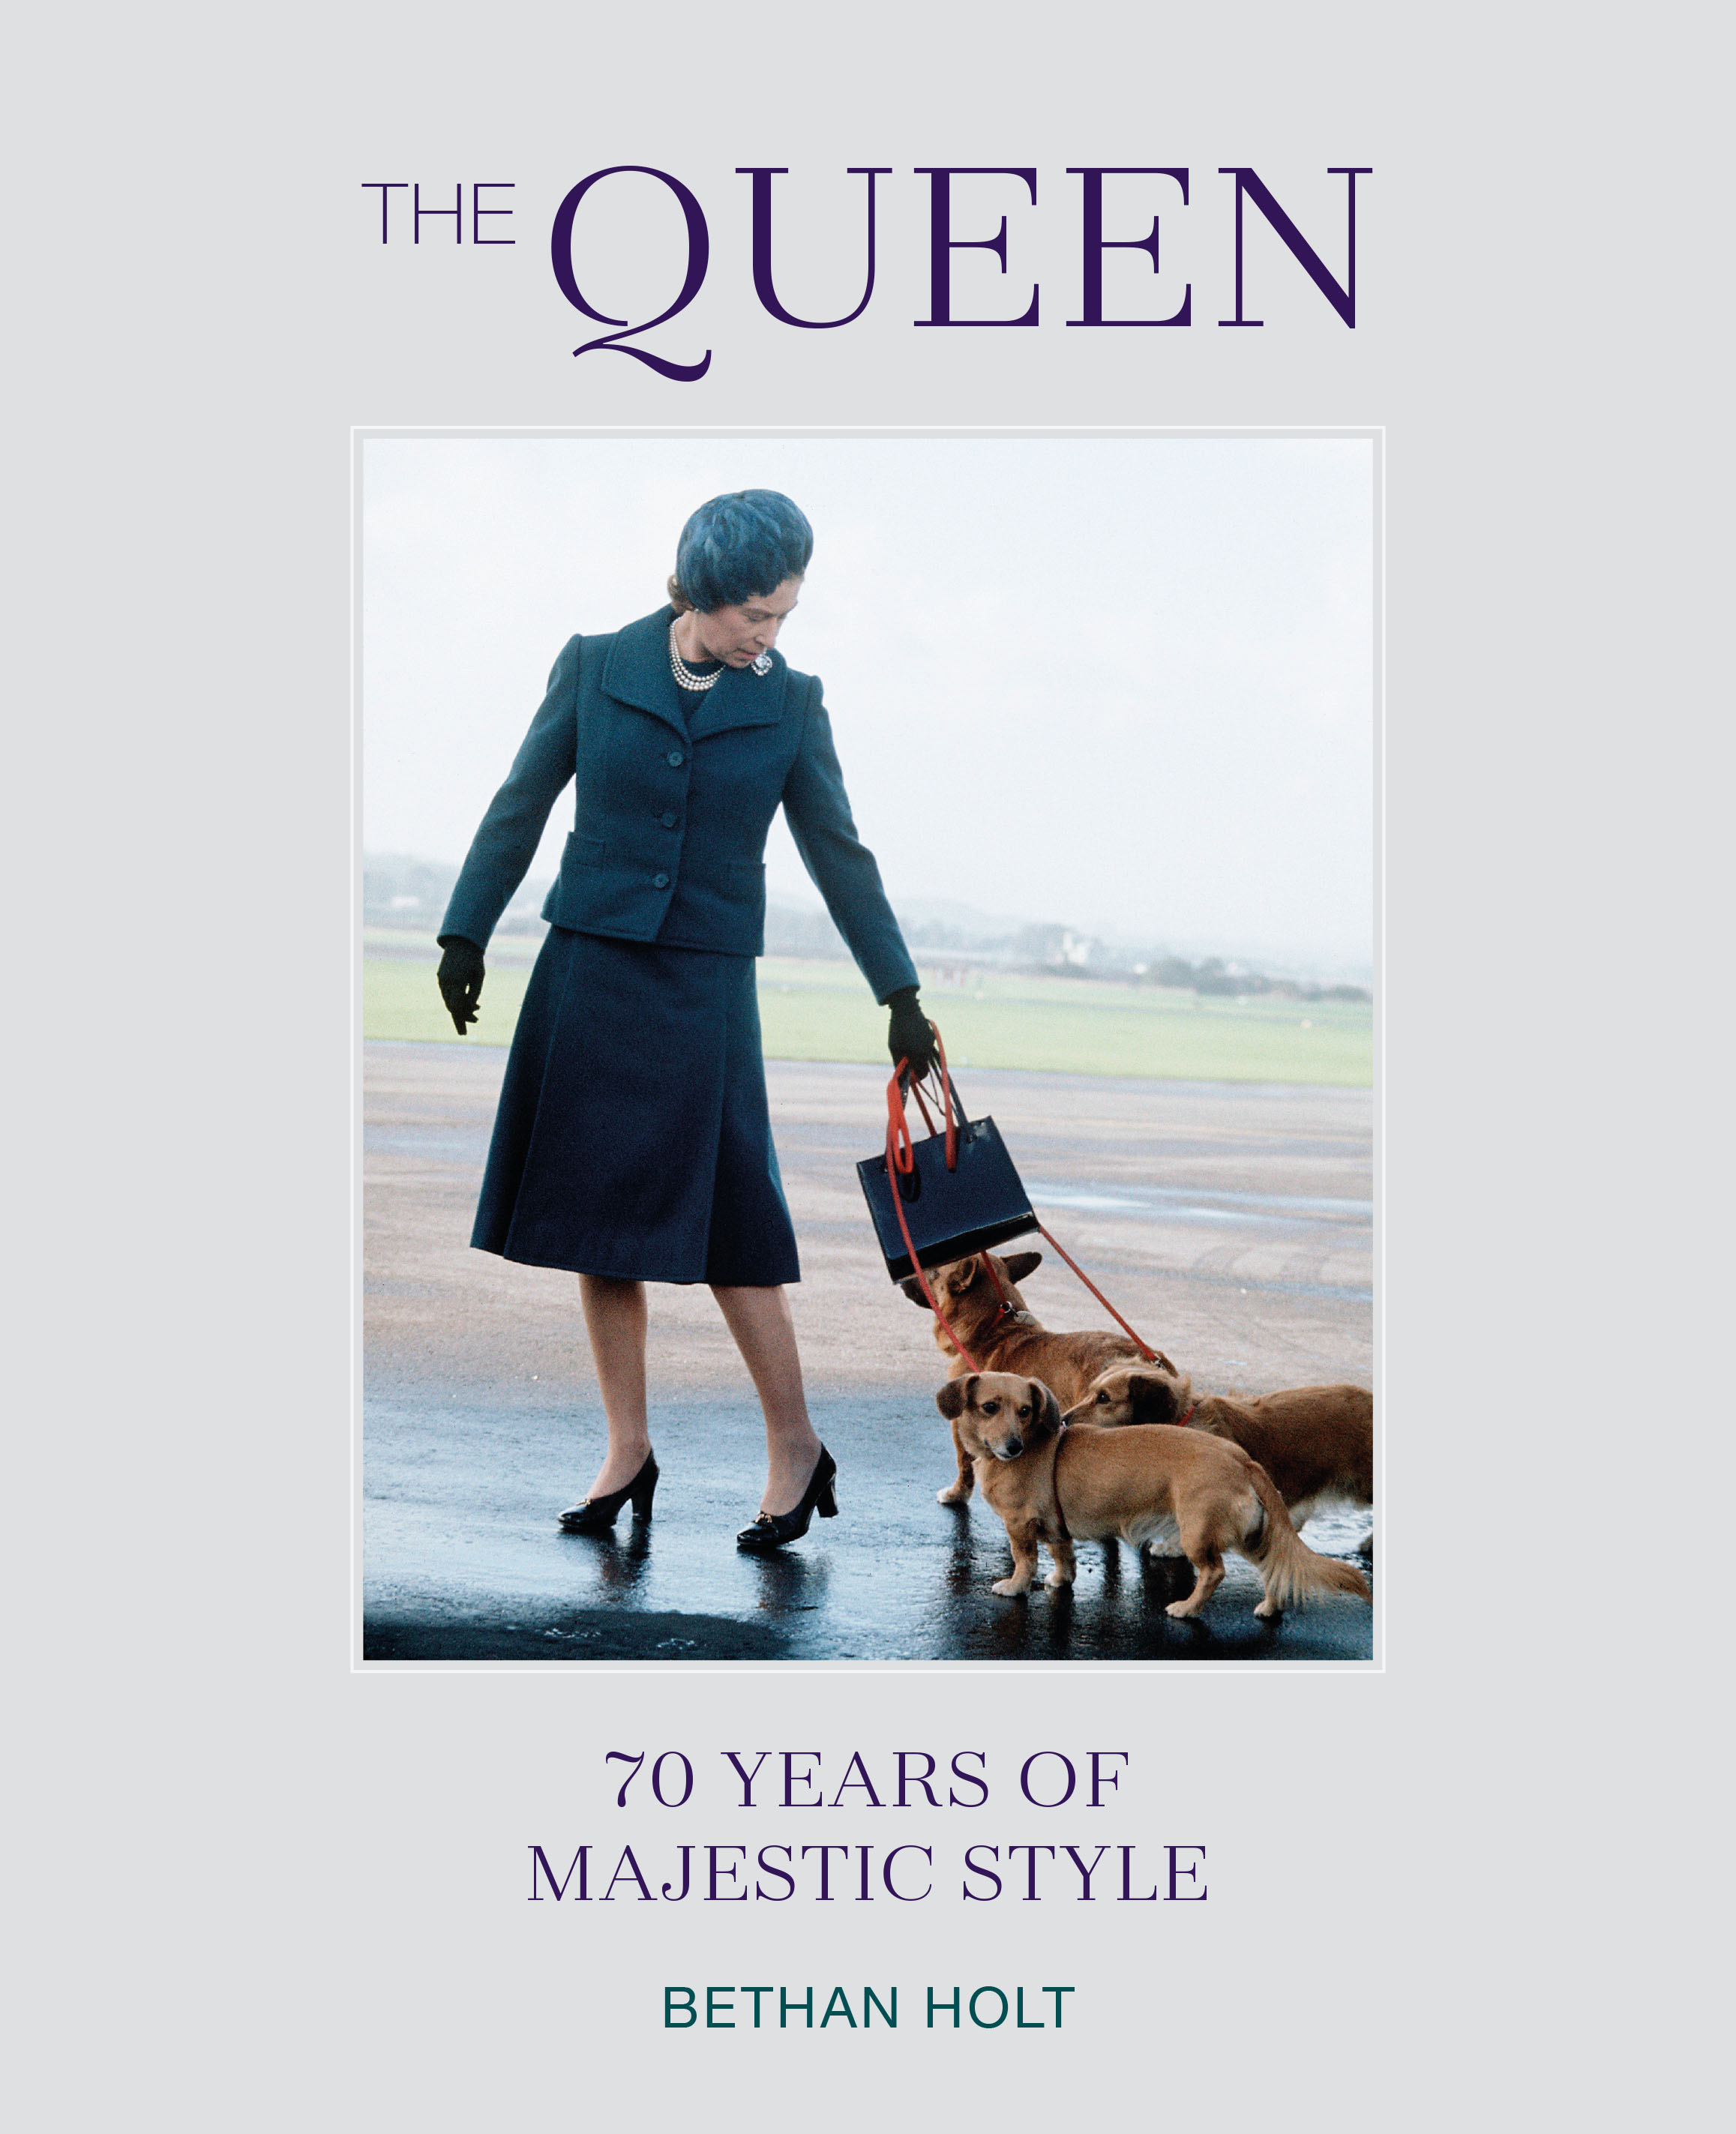 The Queen: 70 years of Majestic Style by Bethan Holt